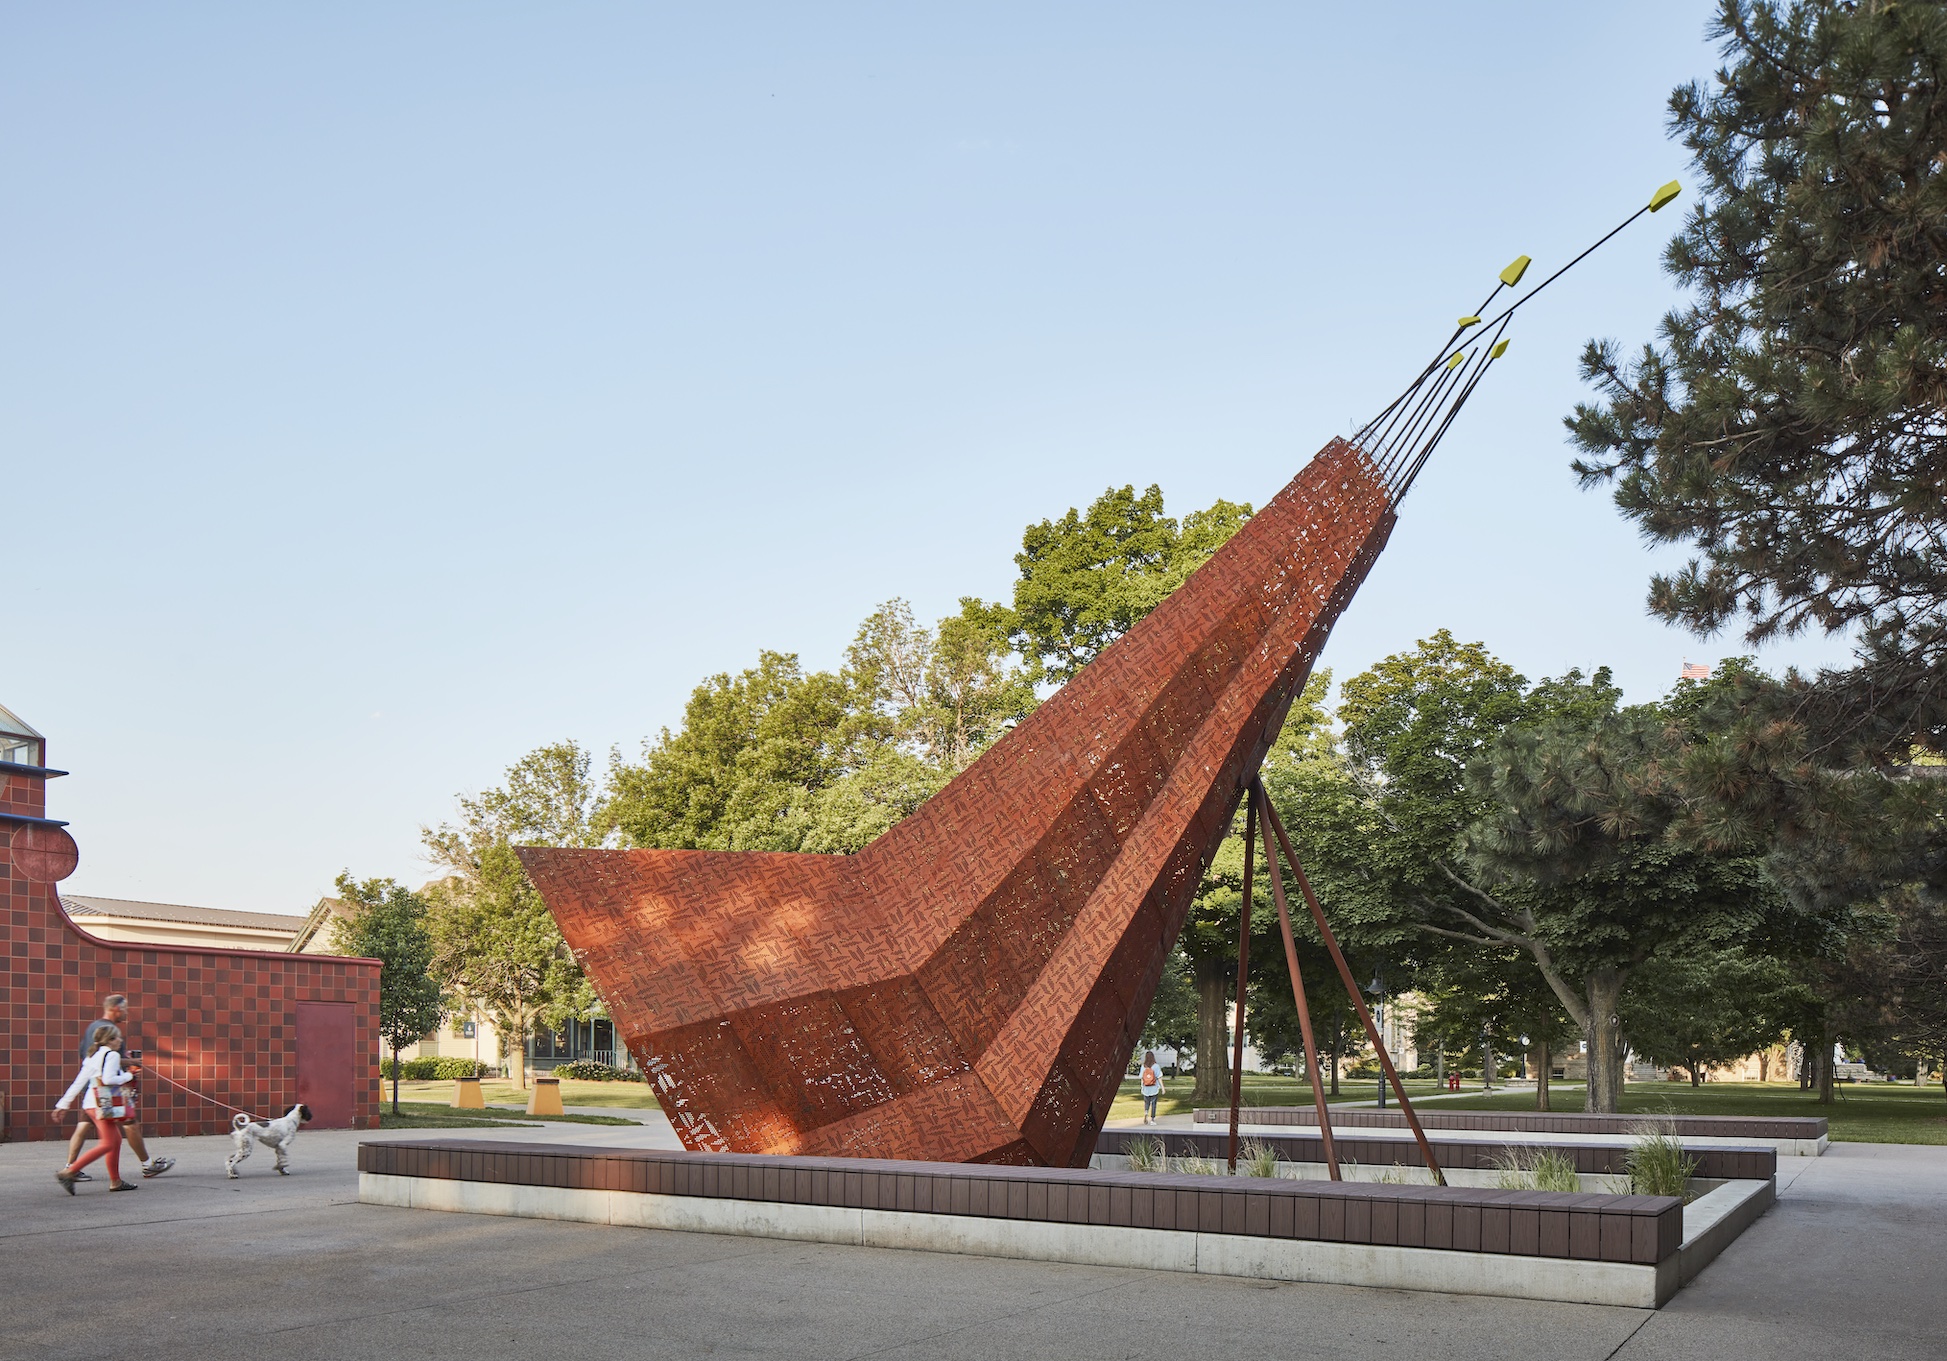 Large outdoor abstract triangle-shaped sculpture by Christopher Cornelius with people walking by